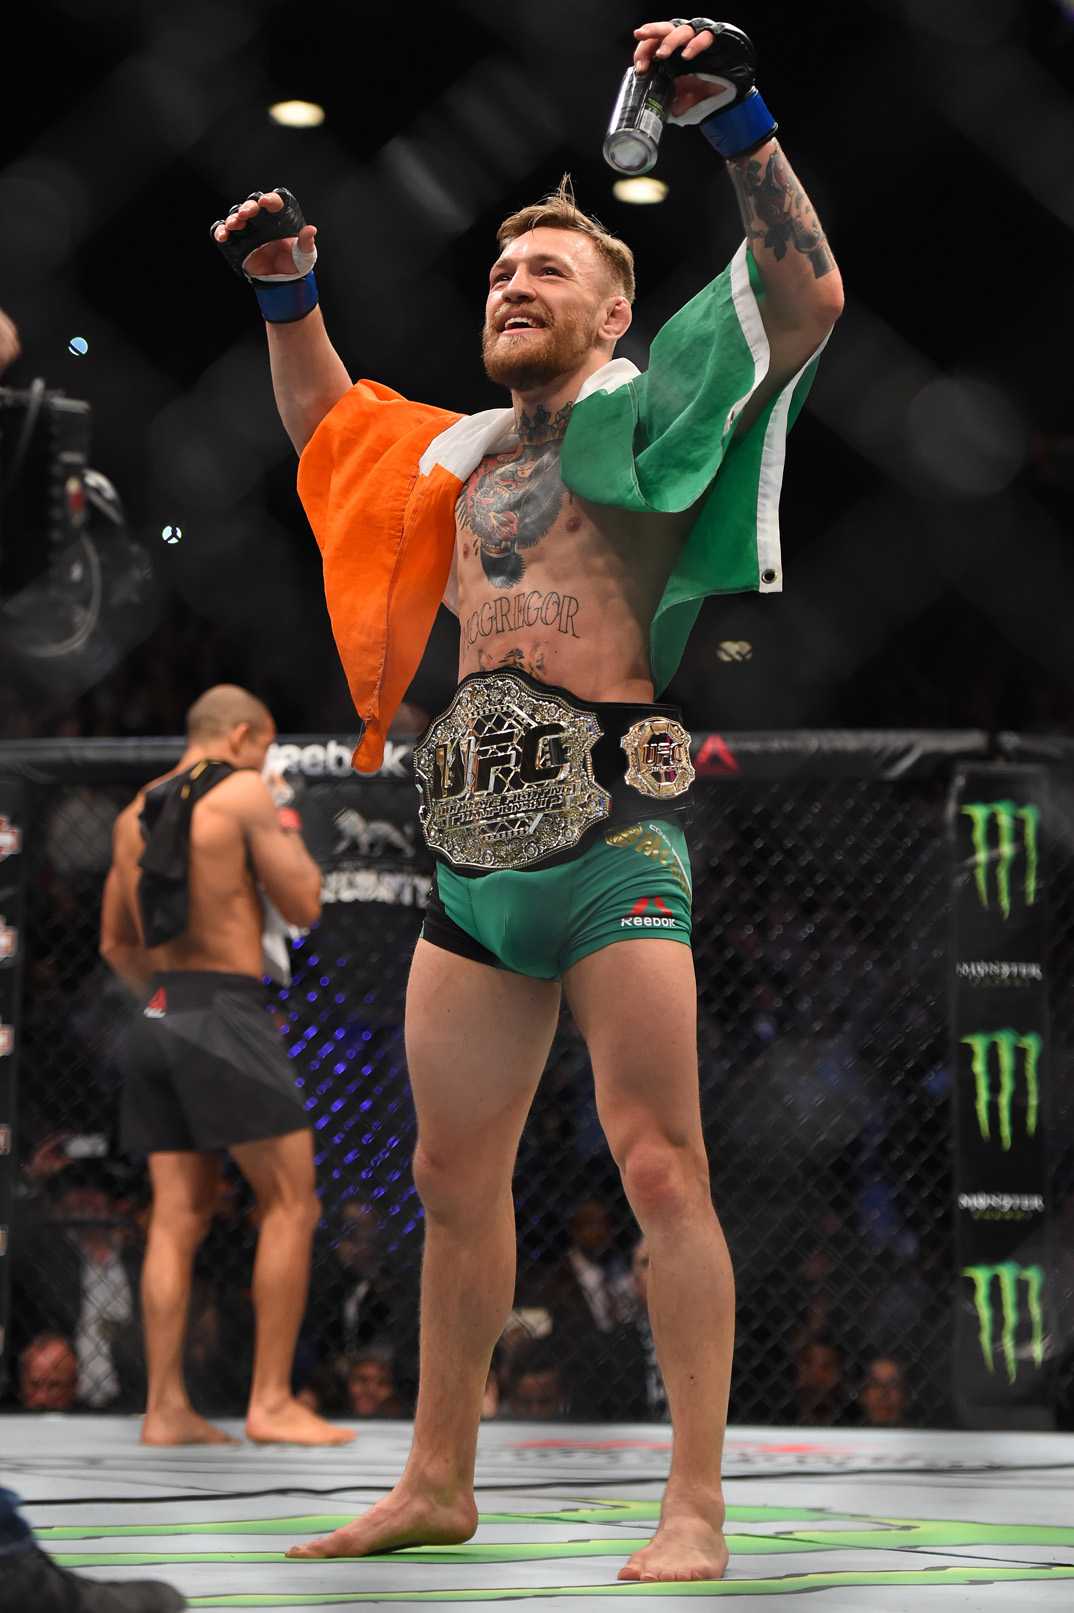 Monster Energy’s Conor McGregor To Fight on Main Card UFC 205 at Madison Square Garden in New York on November 12